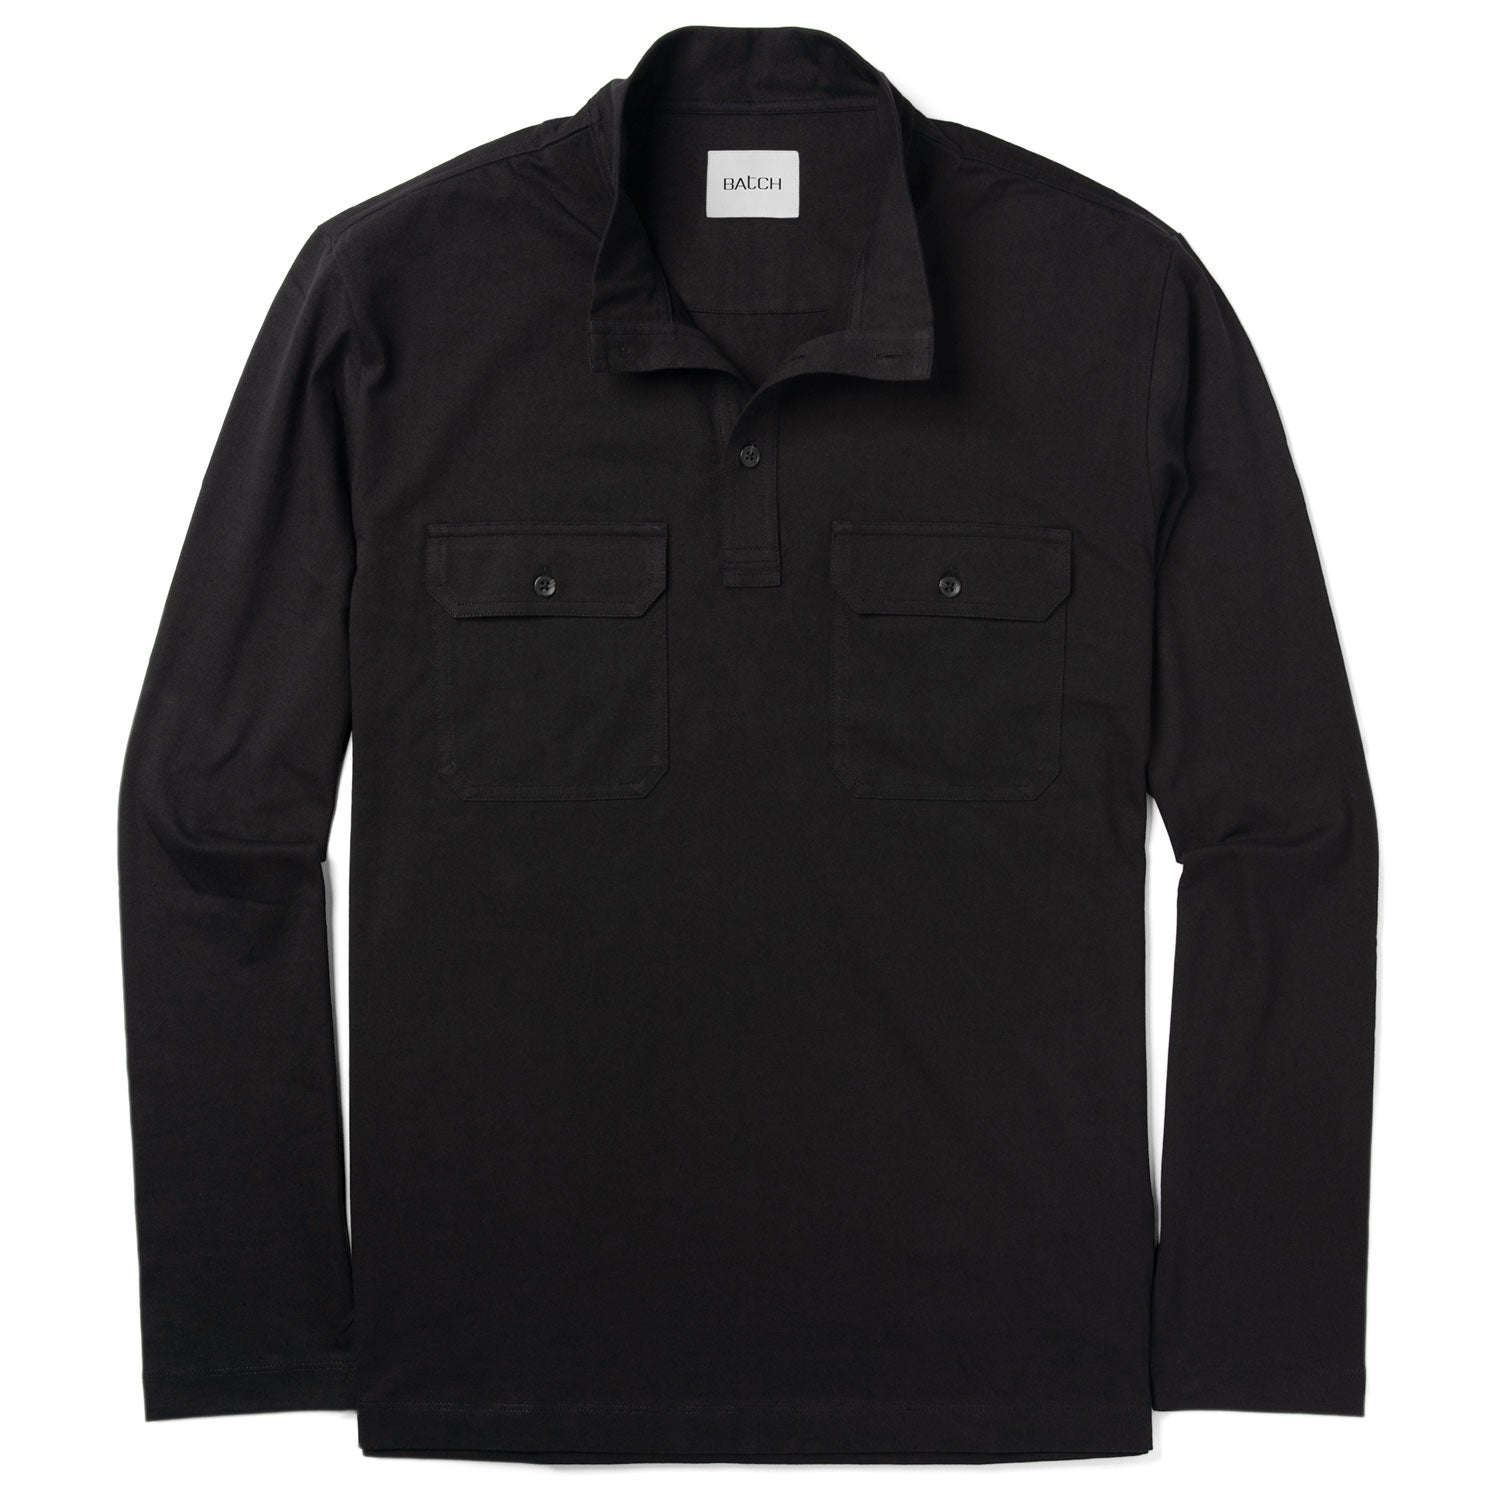 Constructor Pullover Shirt –  Black Cotton Jersey